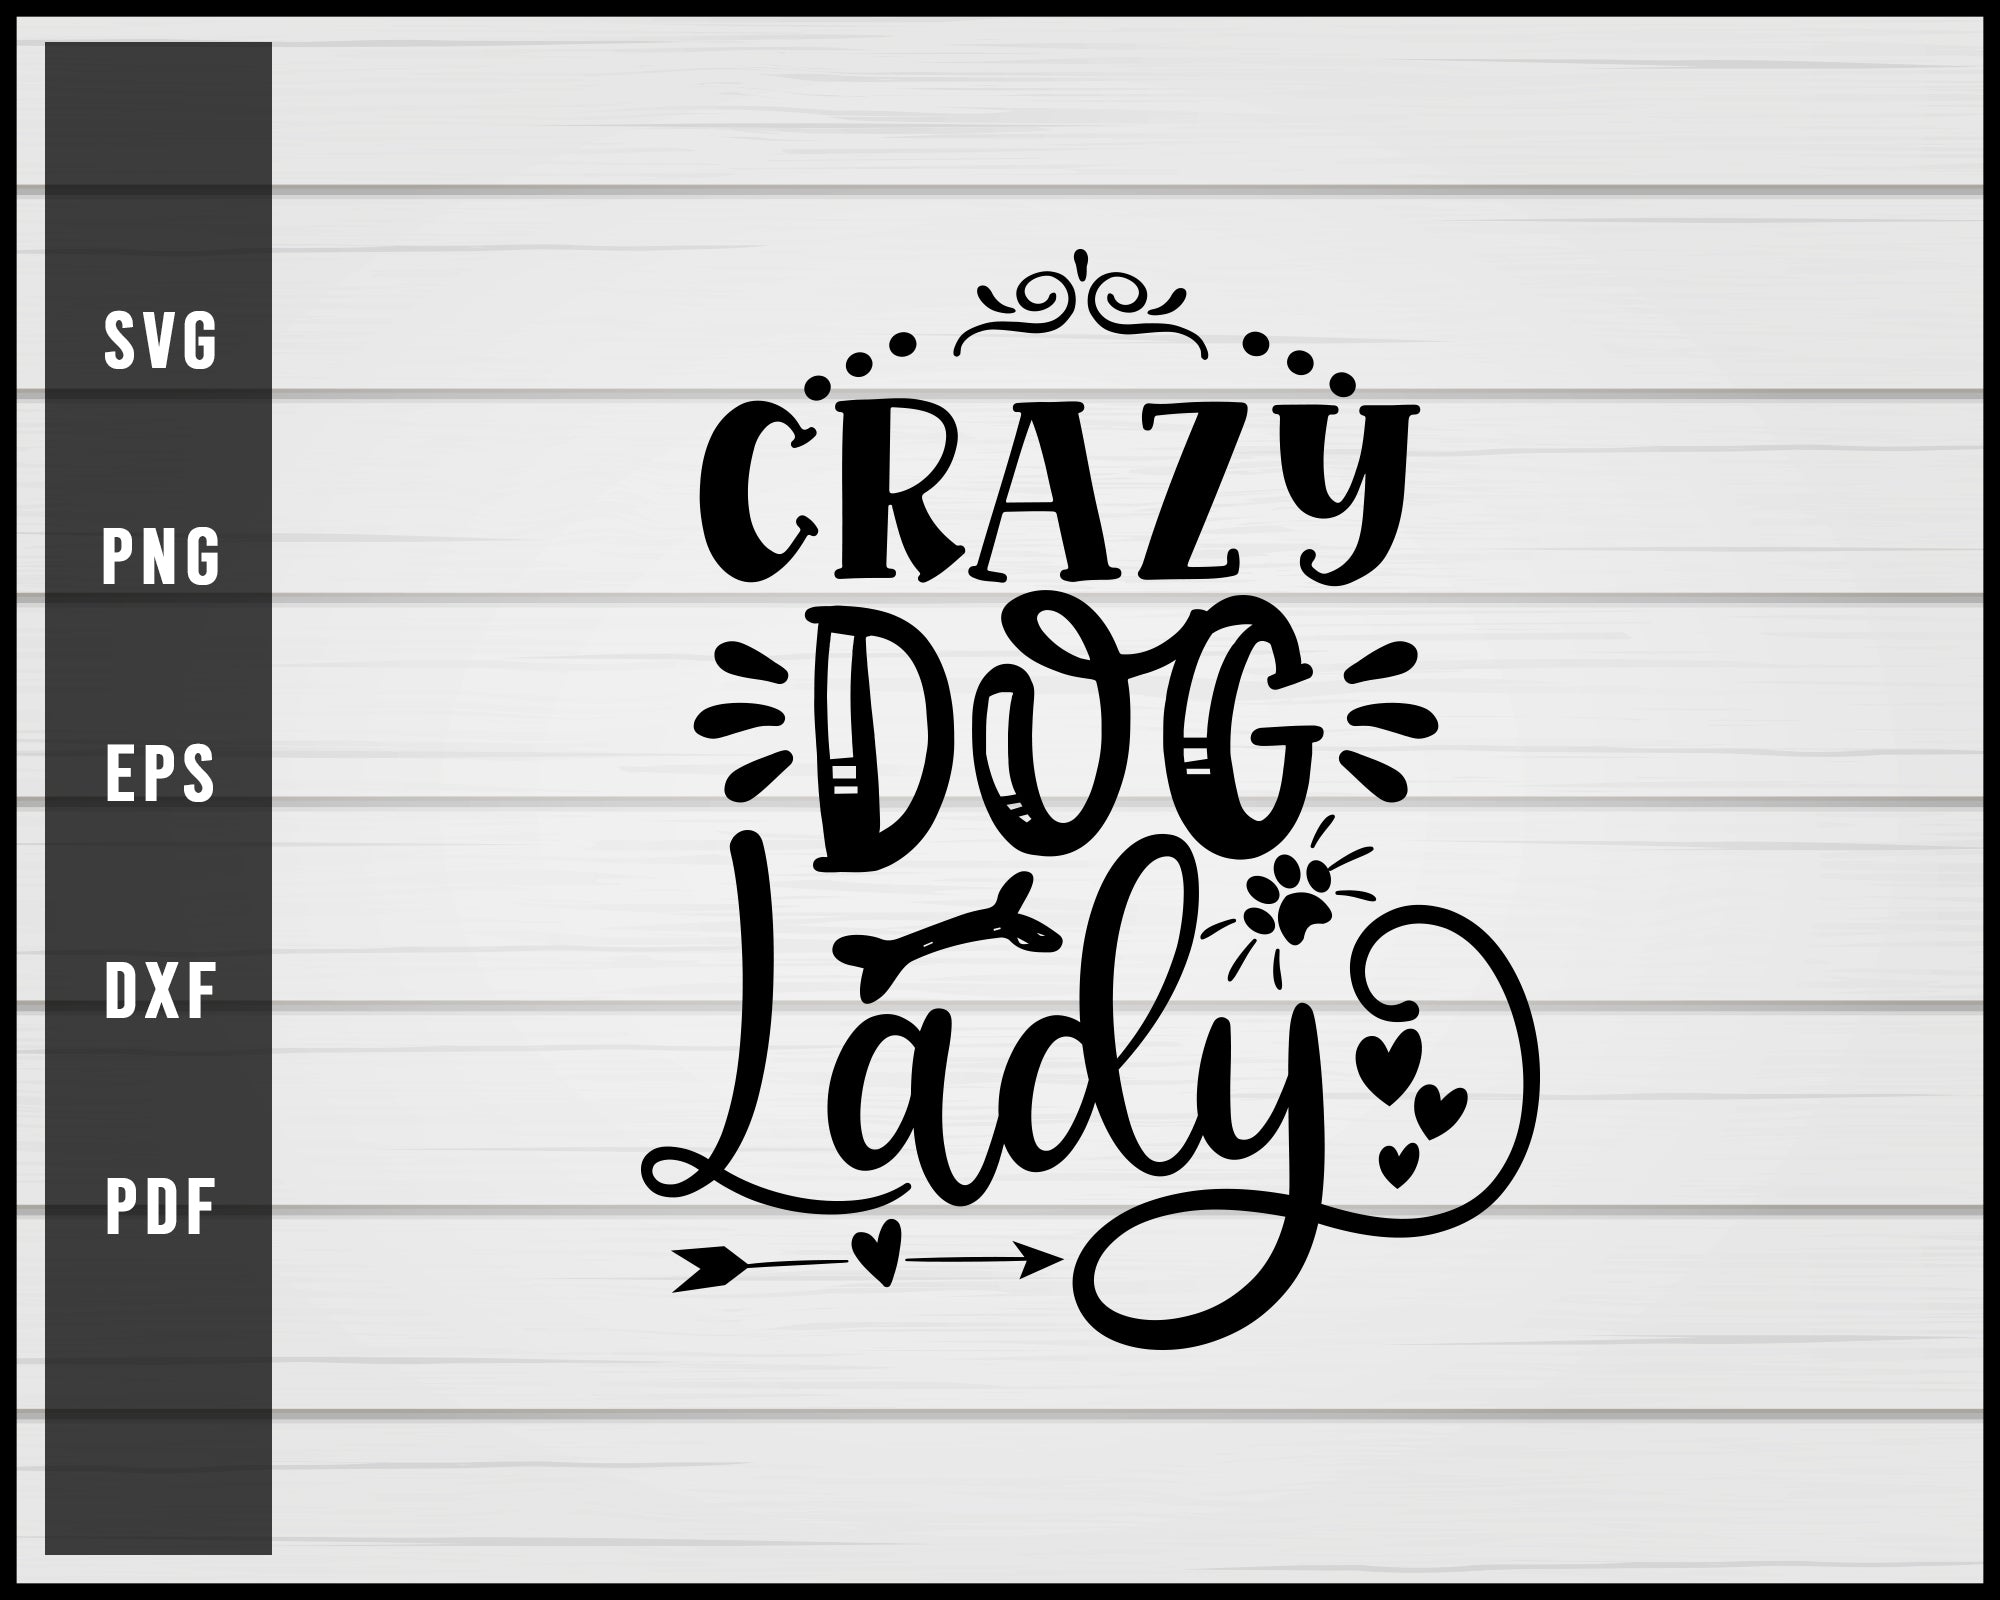 Crazy dog lady svg png eps Silhouette Designs For Cricut And Printable Files